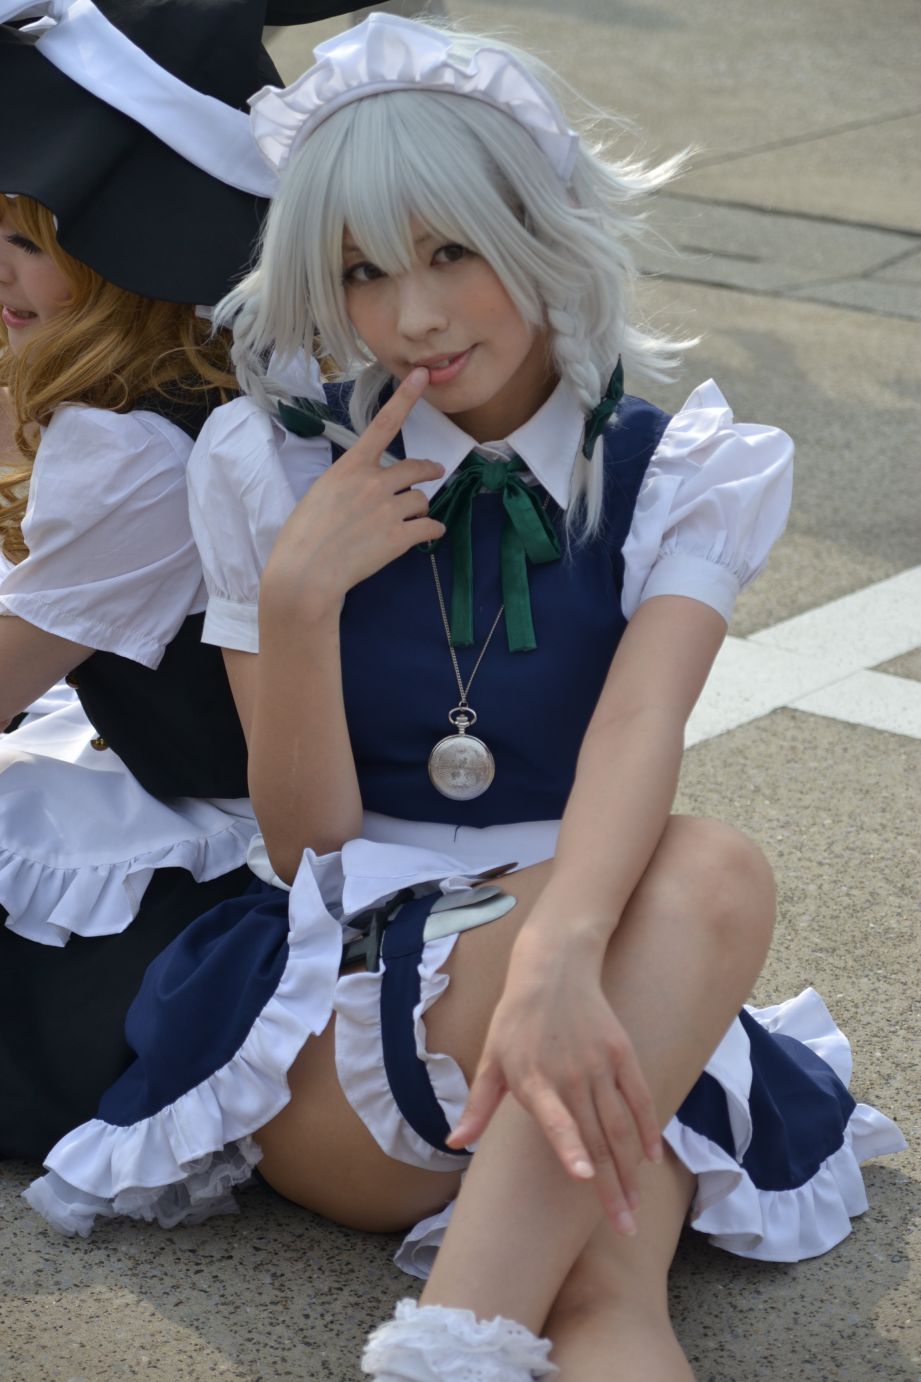 cosplay at Comiket 82 has been attracting much praise, not least thanks to ...